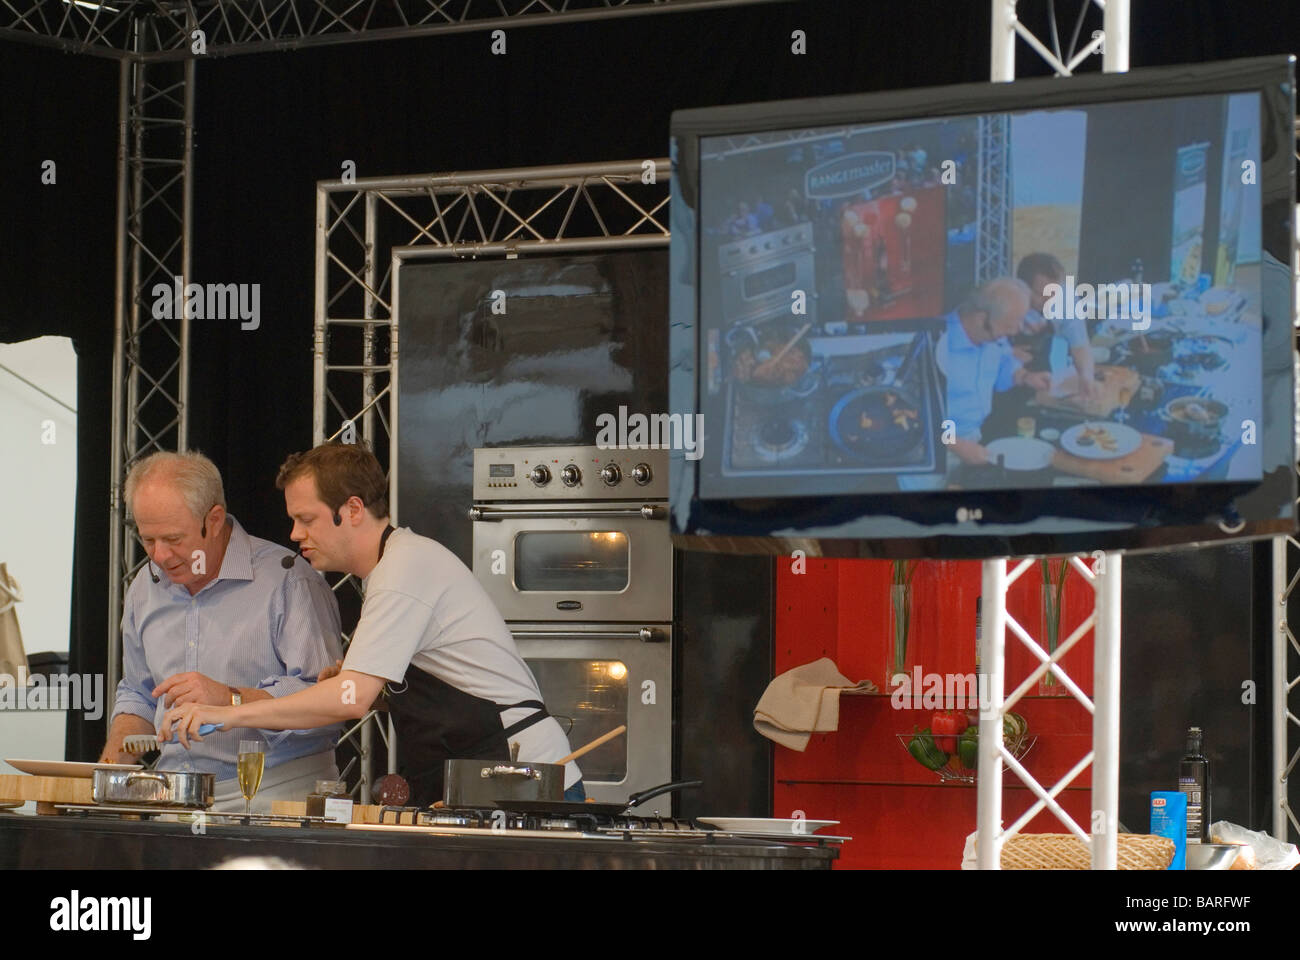 Matthew Fort Tom Parker Bowles giving food demonstration     Aldeburgh Food Fair at Snape Maltings Suffolk England UK 2009 2000s HOMER SYKES Stock Photo